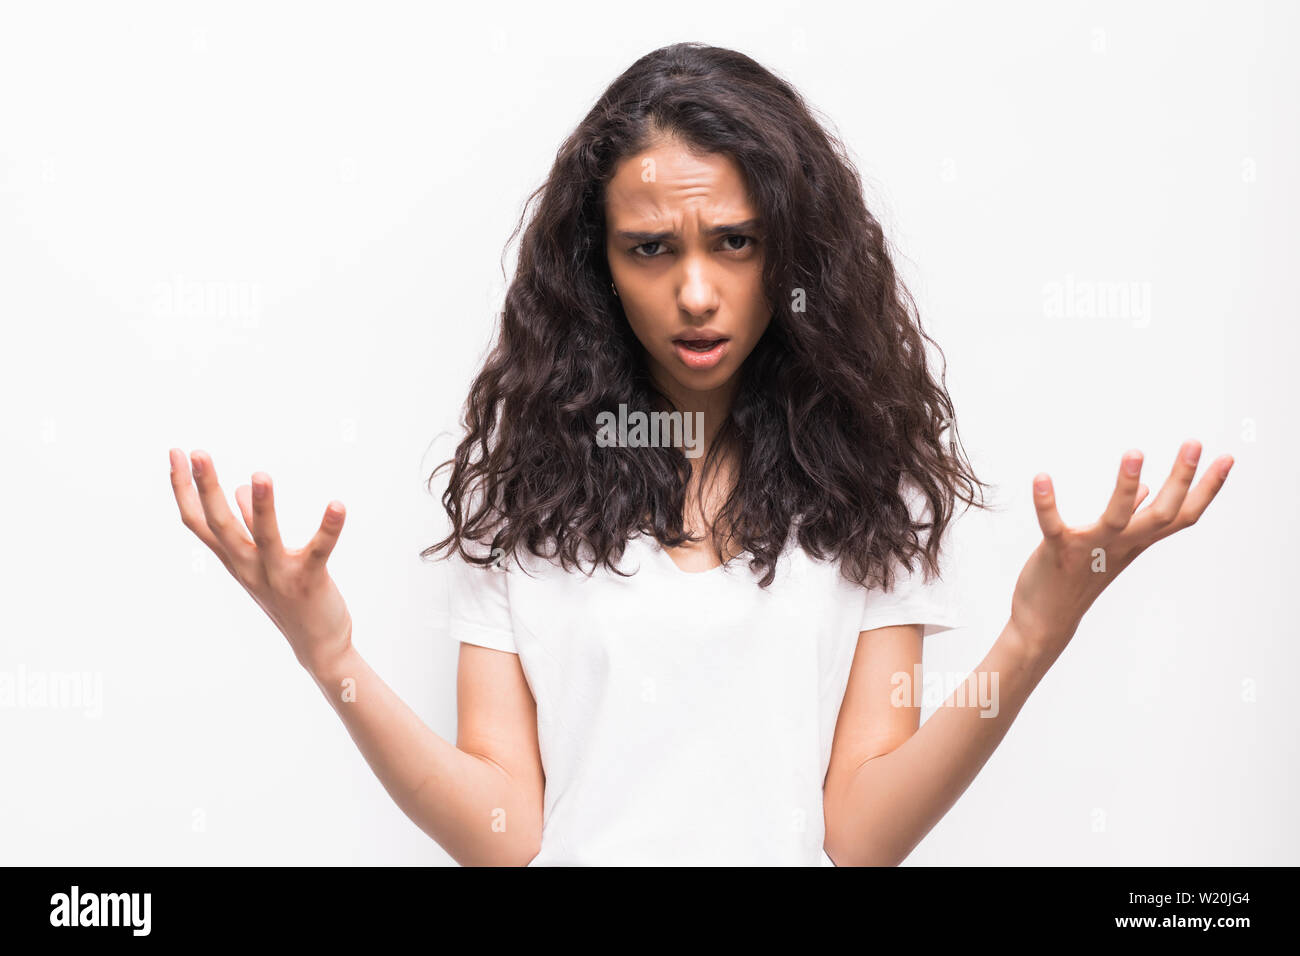 Picture of enraged dissatisfied young female grimacing, clenching teeth and making angry gesture while feeling furious at her cat that broke vase. Neg Stock Photo